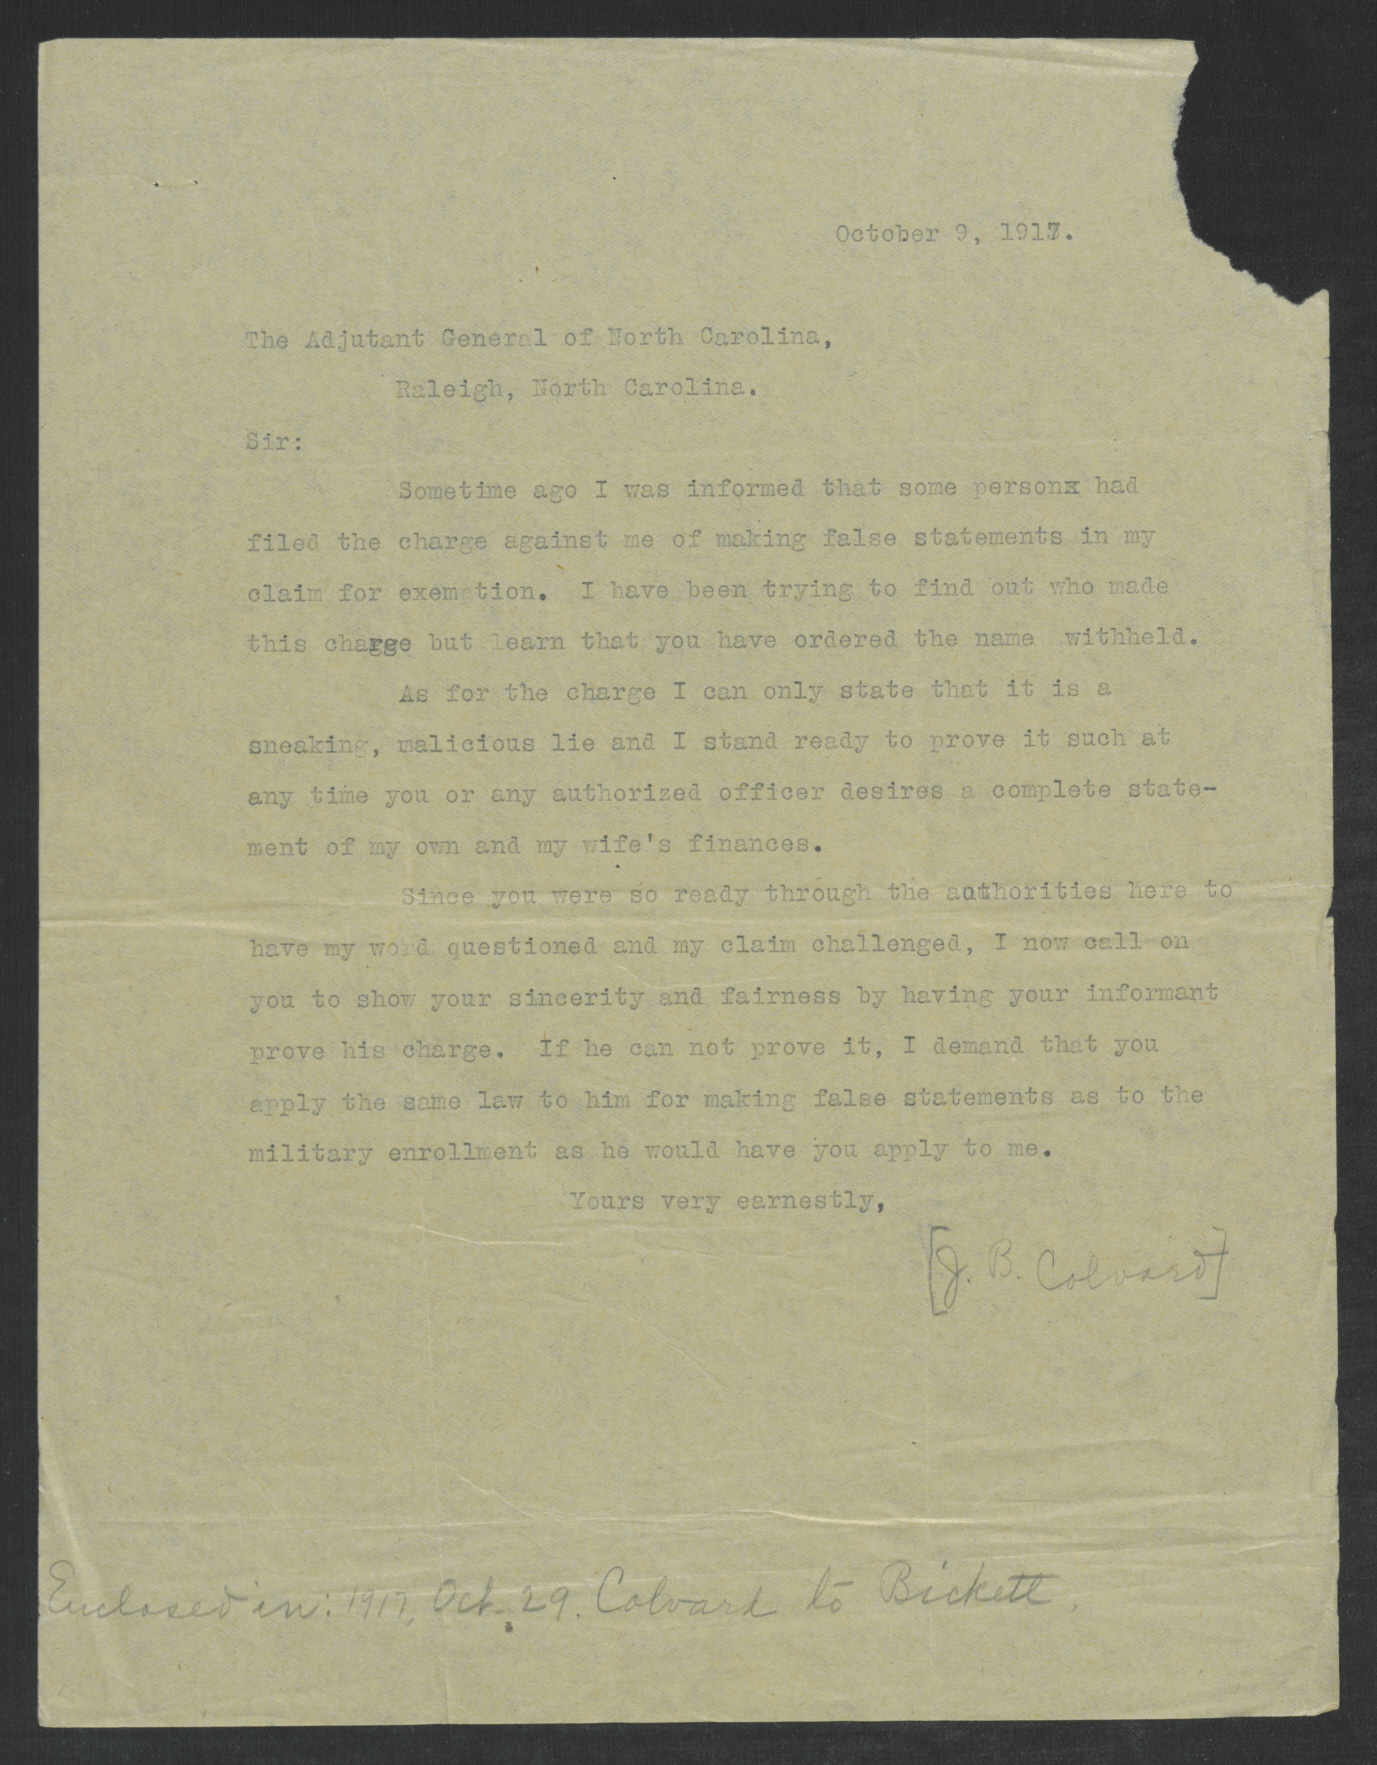 Letter from Joseph B. Colvard to Laurence W. Young, October 9, 1917